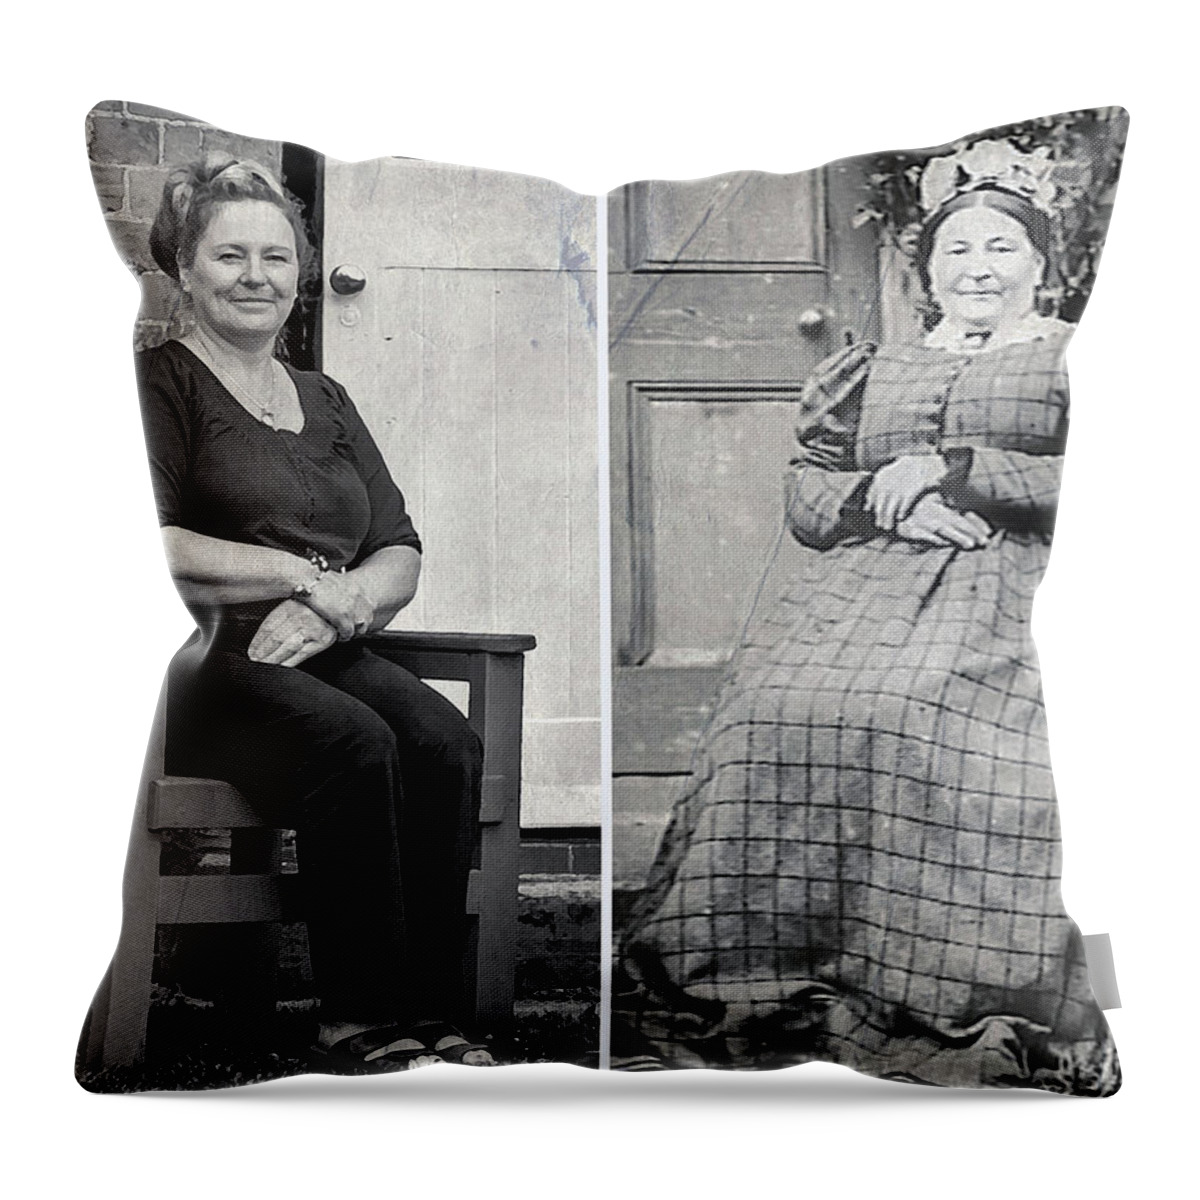  Throw Pillow featuring the photograph Generations by Keith Armstrong